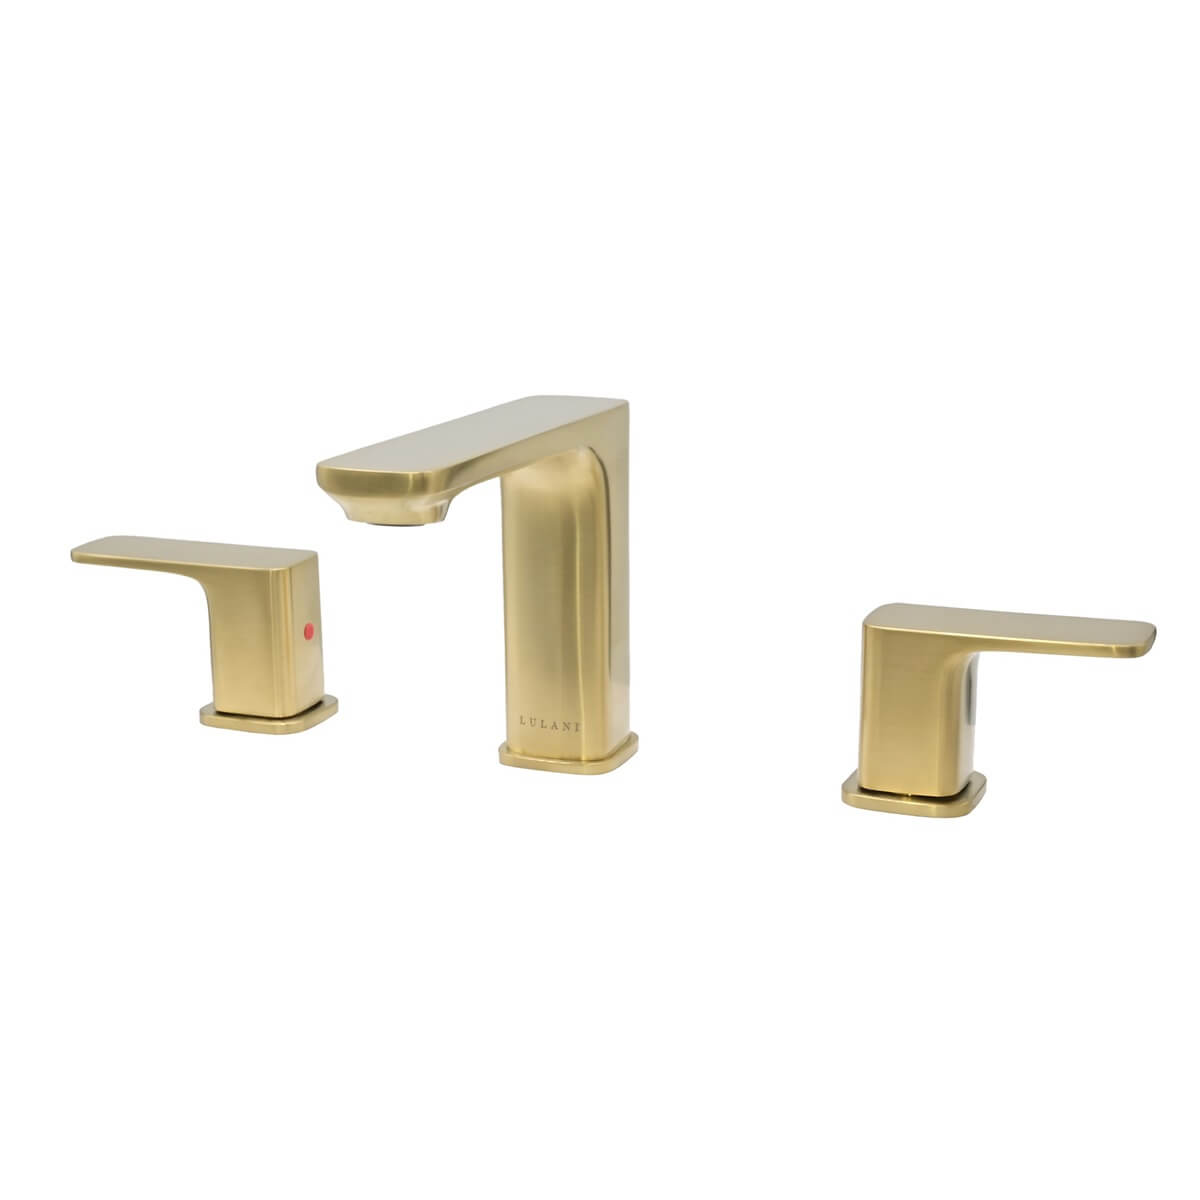 Corsica 2 Handle Widespread Brass Bathroom Faucet with drain assembly